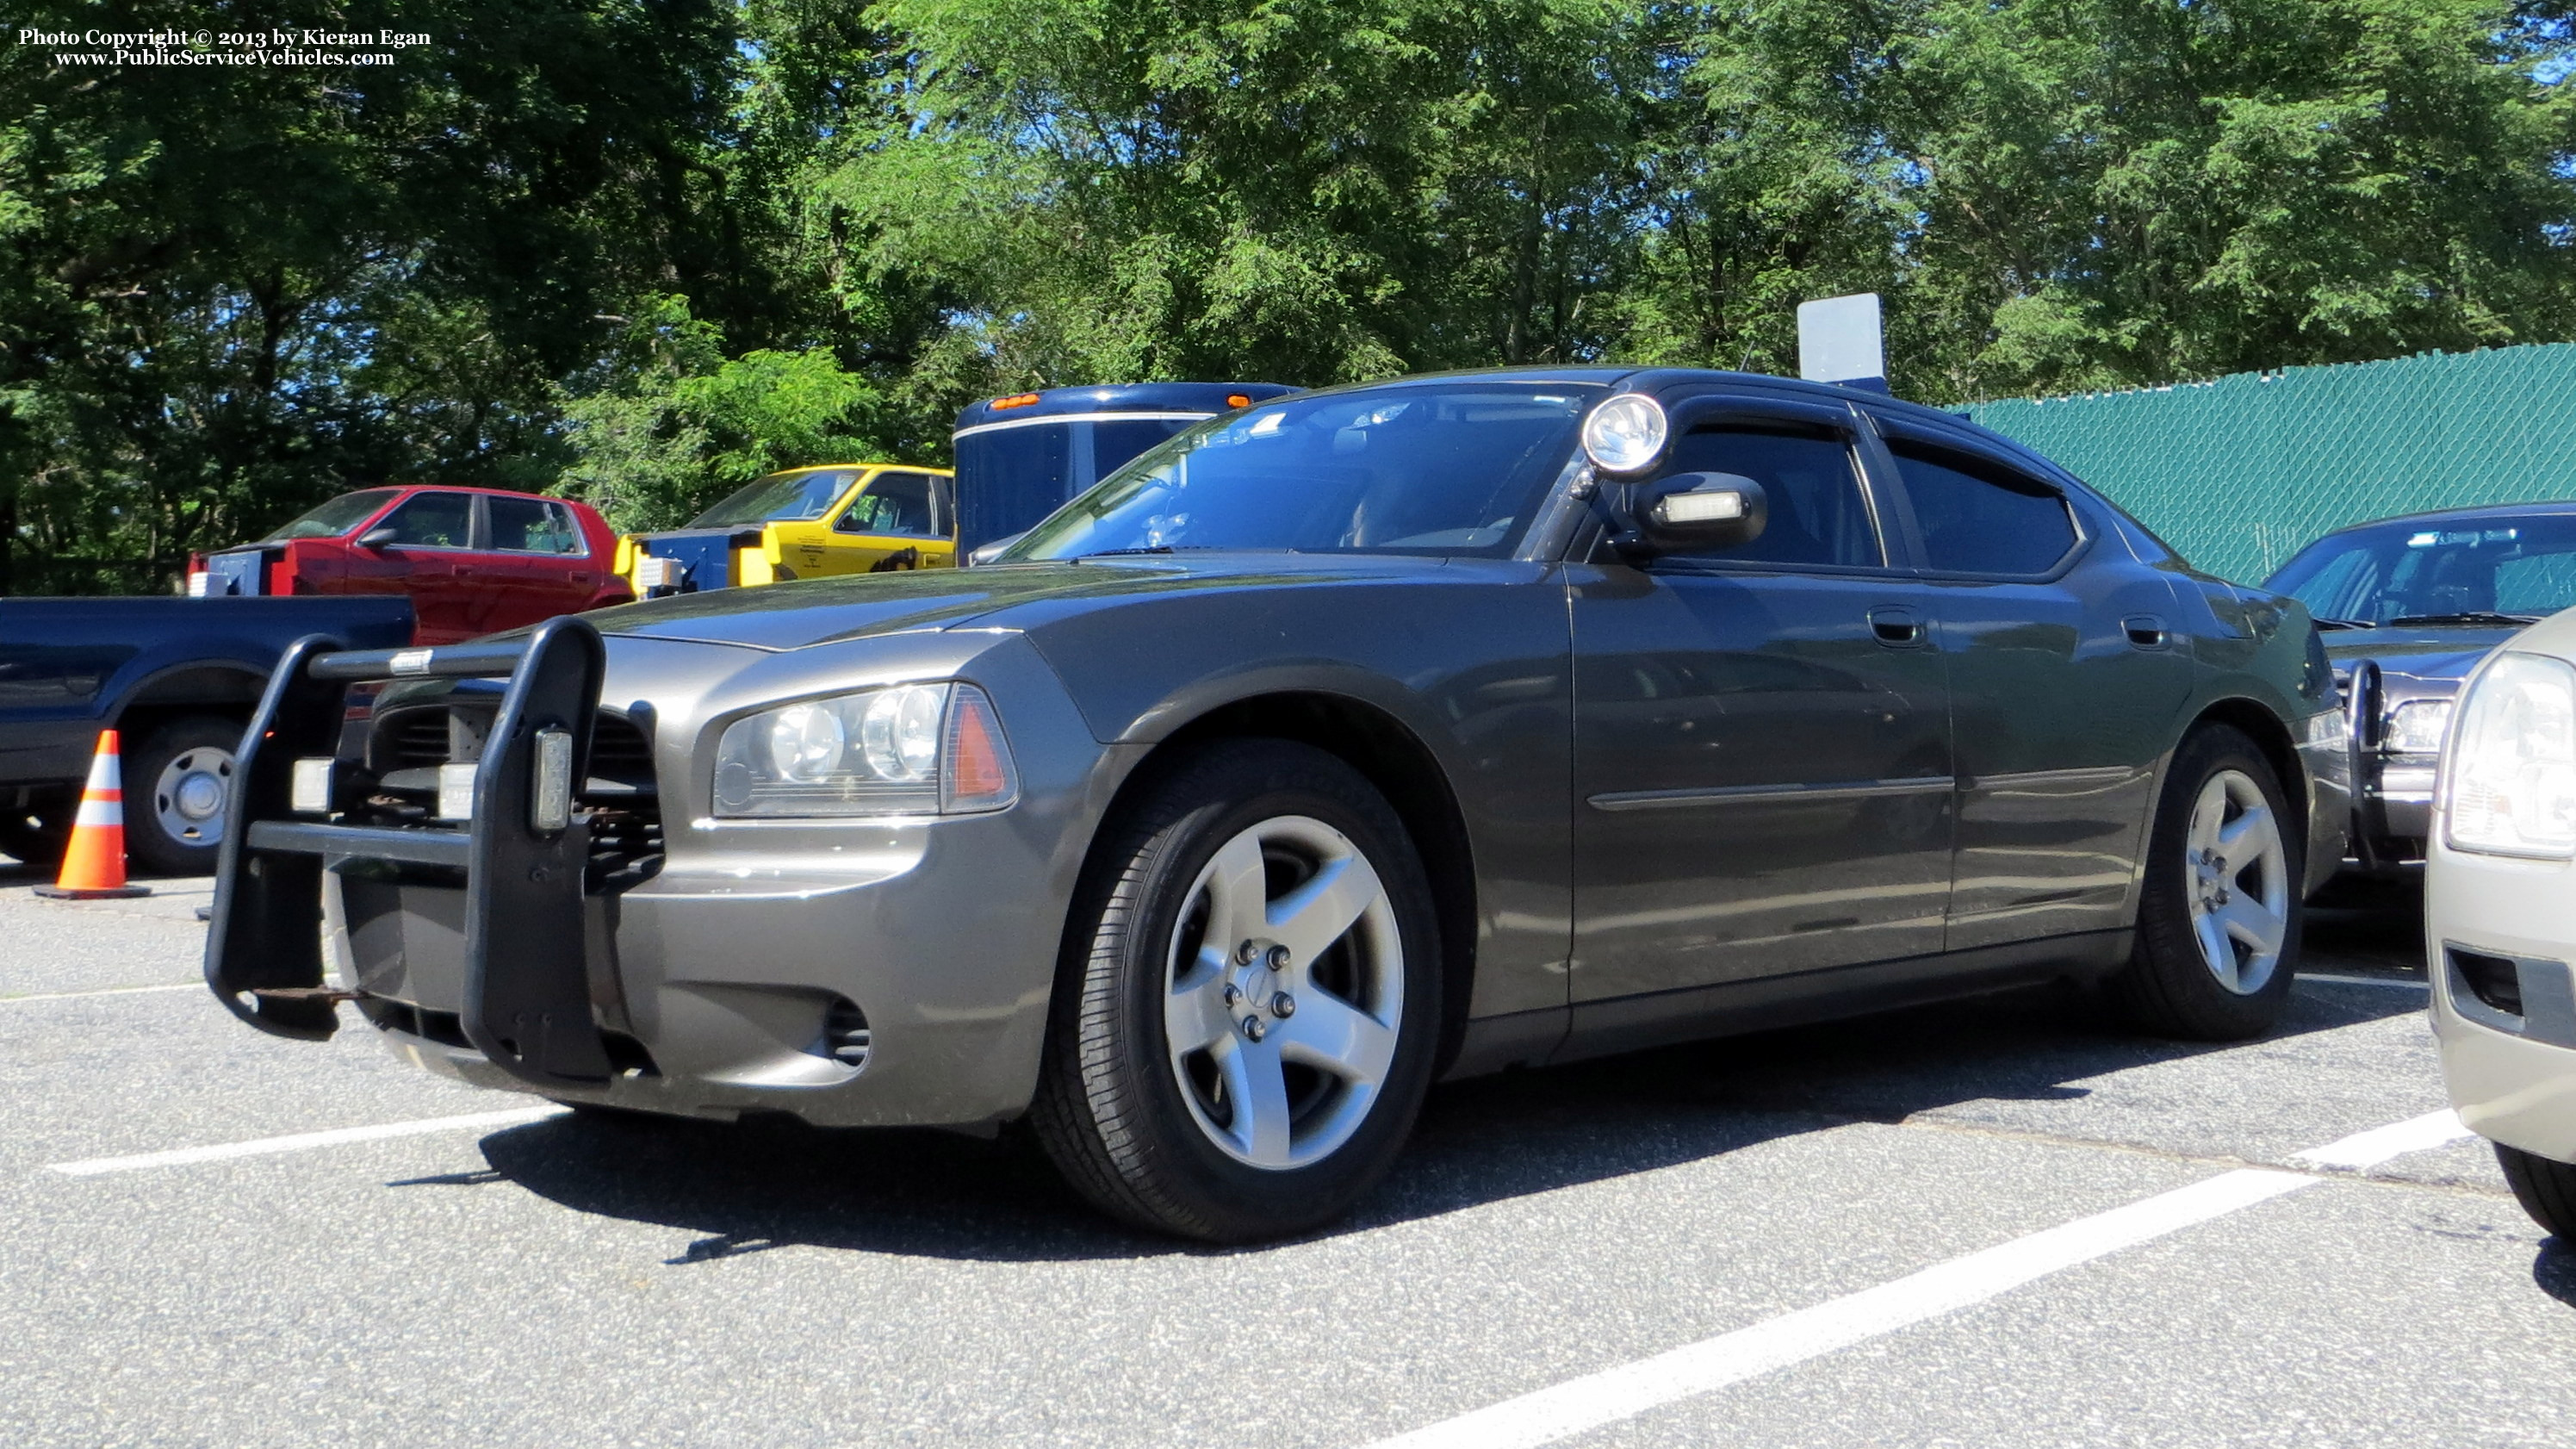 A photo  of Massachusetts State Police
            Cruiser 1324, a 2006-2010 Dodge Charger             taken by Kieran Egan